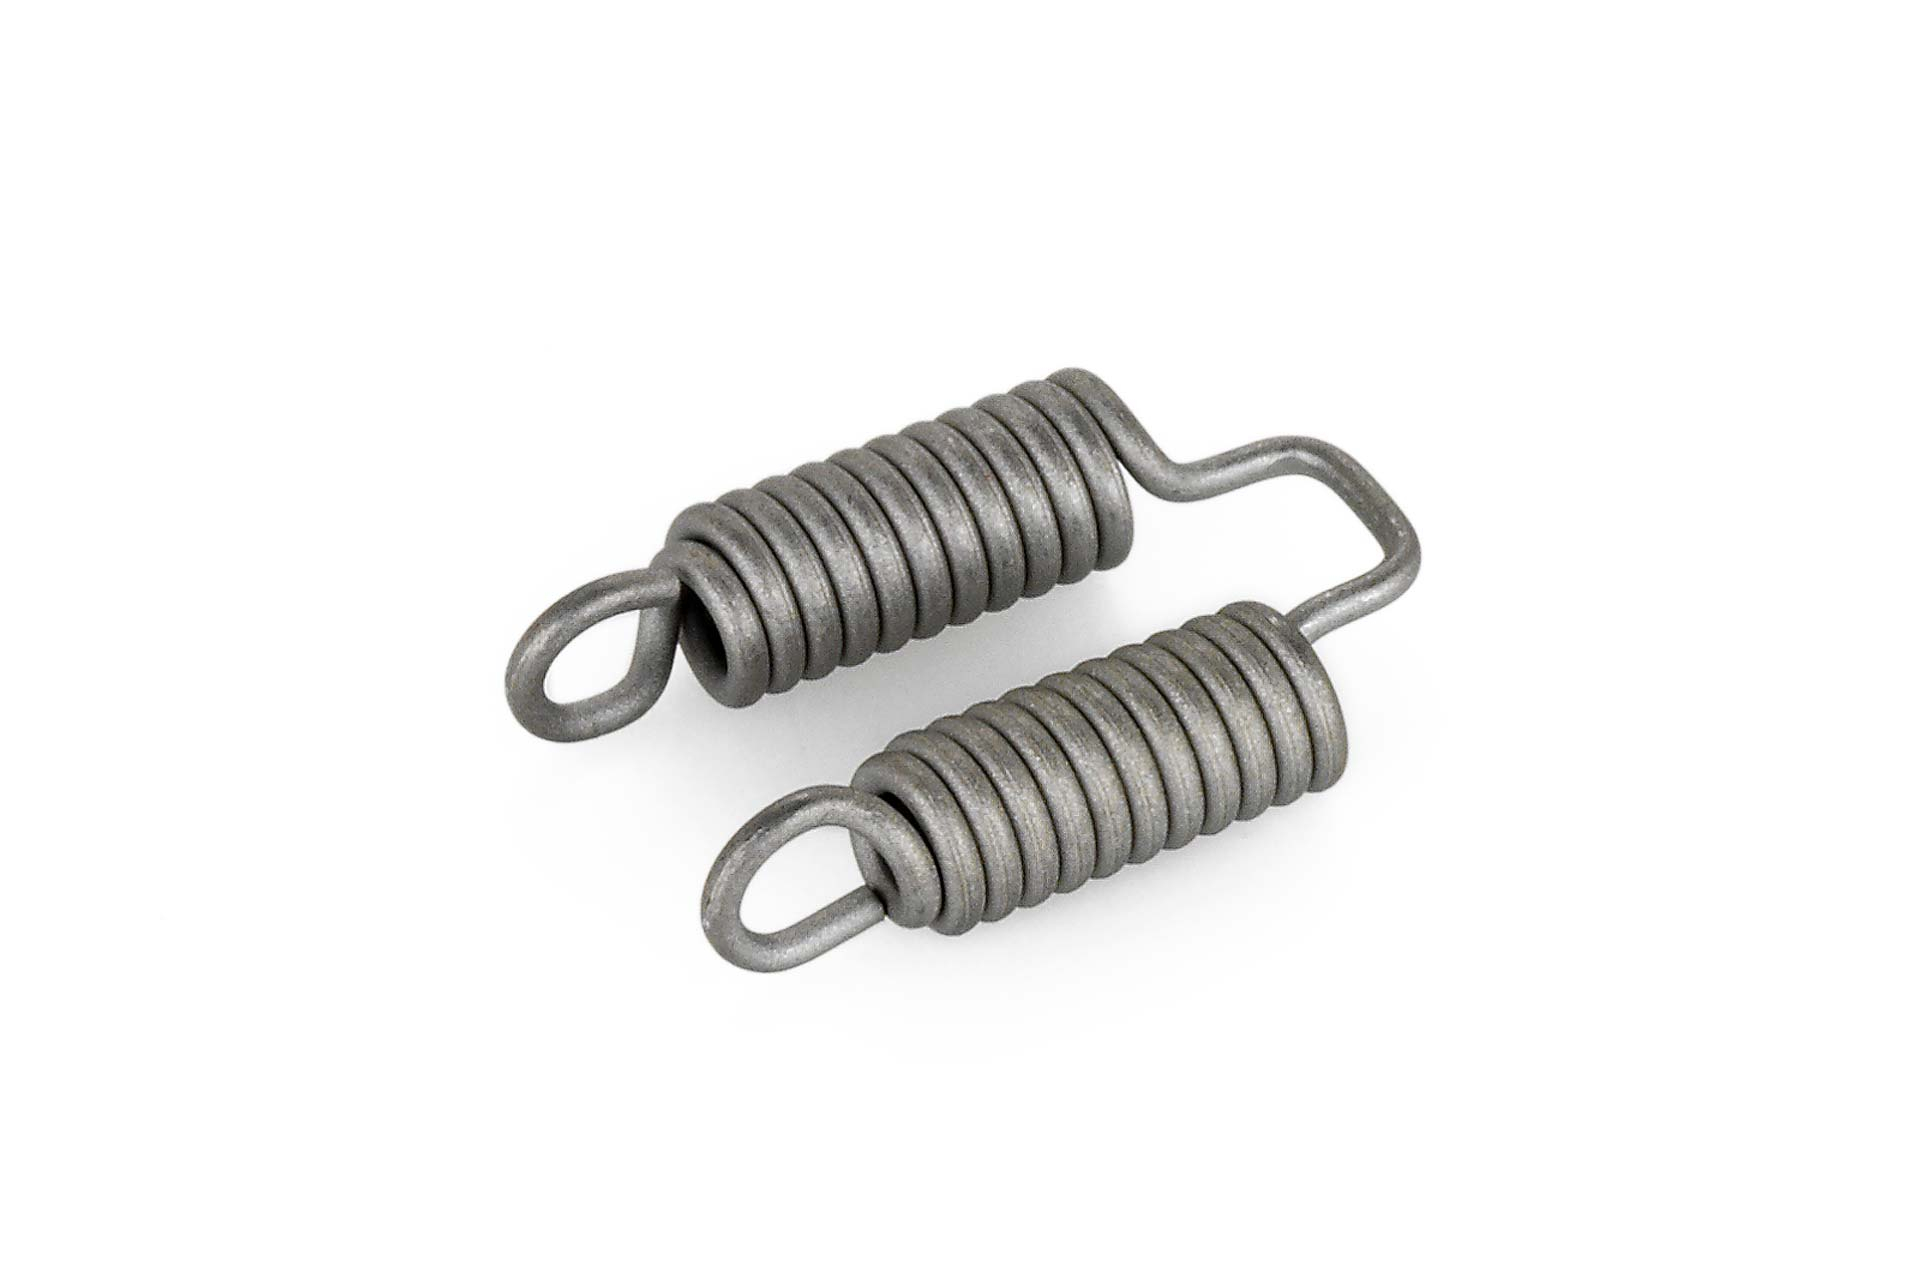 Tension springs for the electricity industry